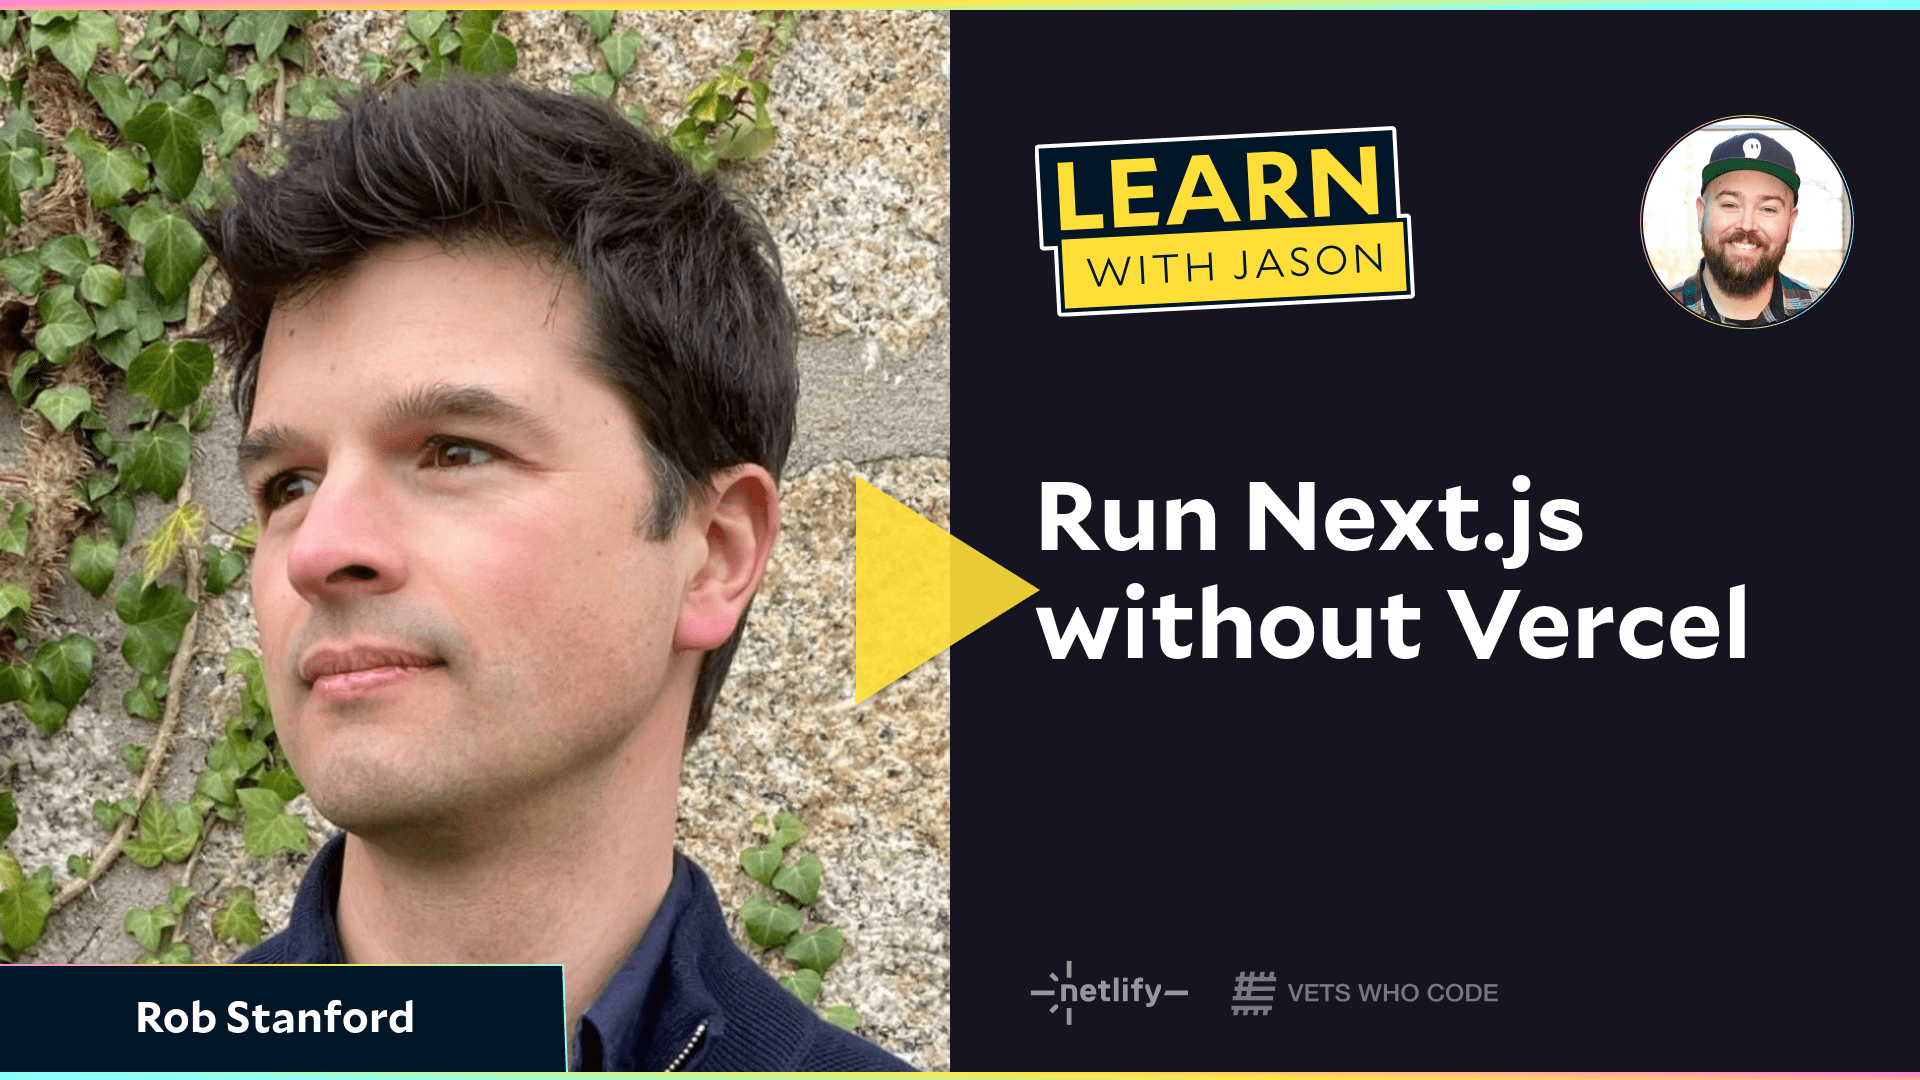 Run Next.js without Vercel (with Rob Stanford)